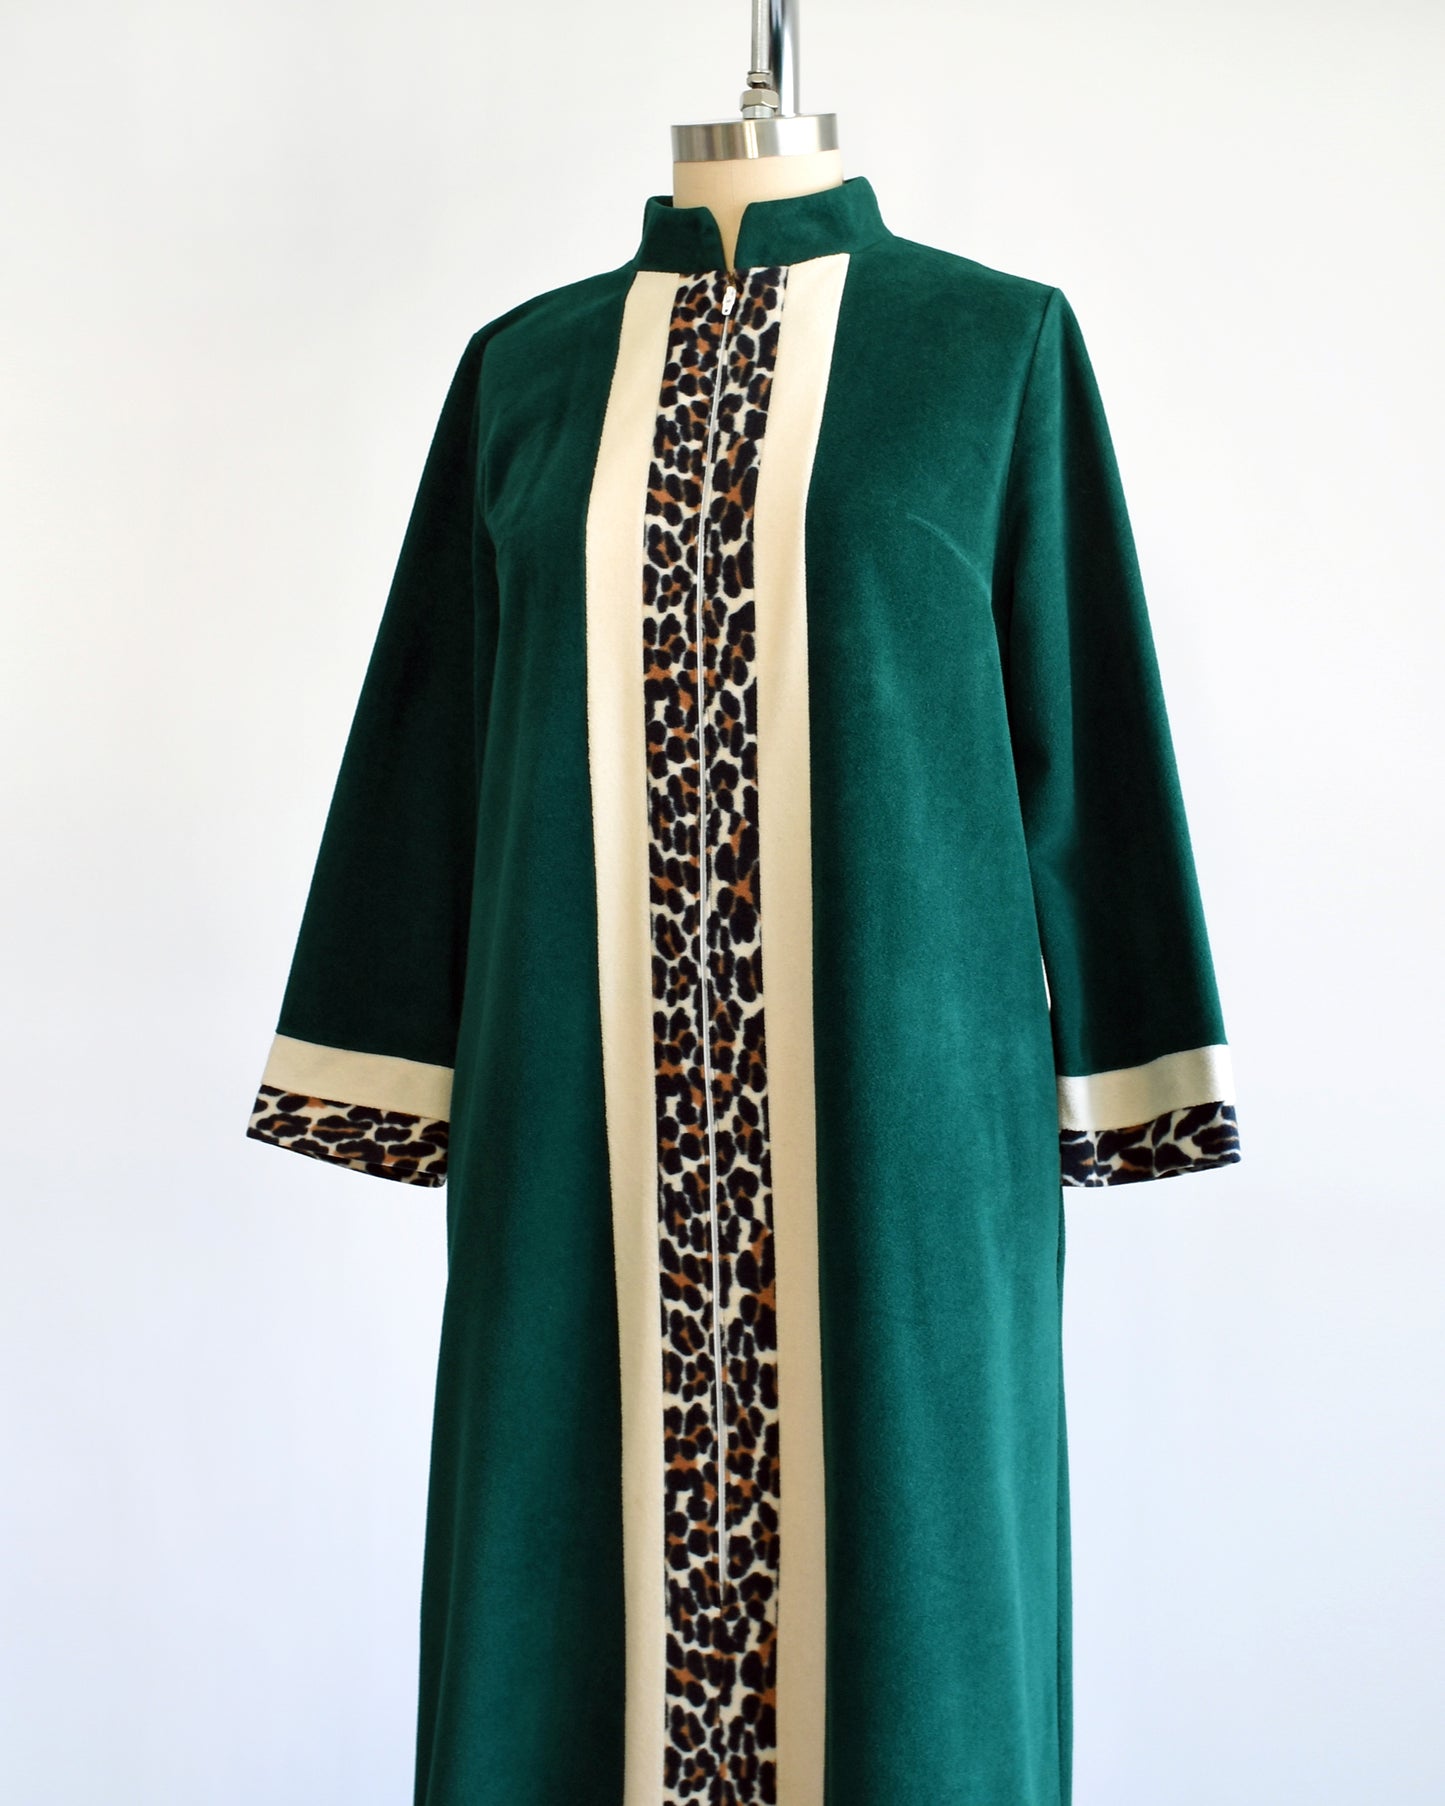 Side front view of a vintage 1970s robe by Vanity Fair that is a rich dark green with a white and leopard print stripe going down the front and matching stripes on the cuffs.